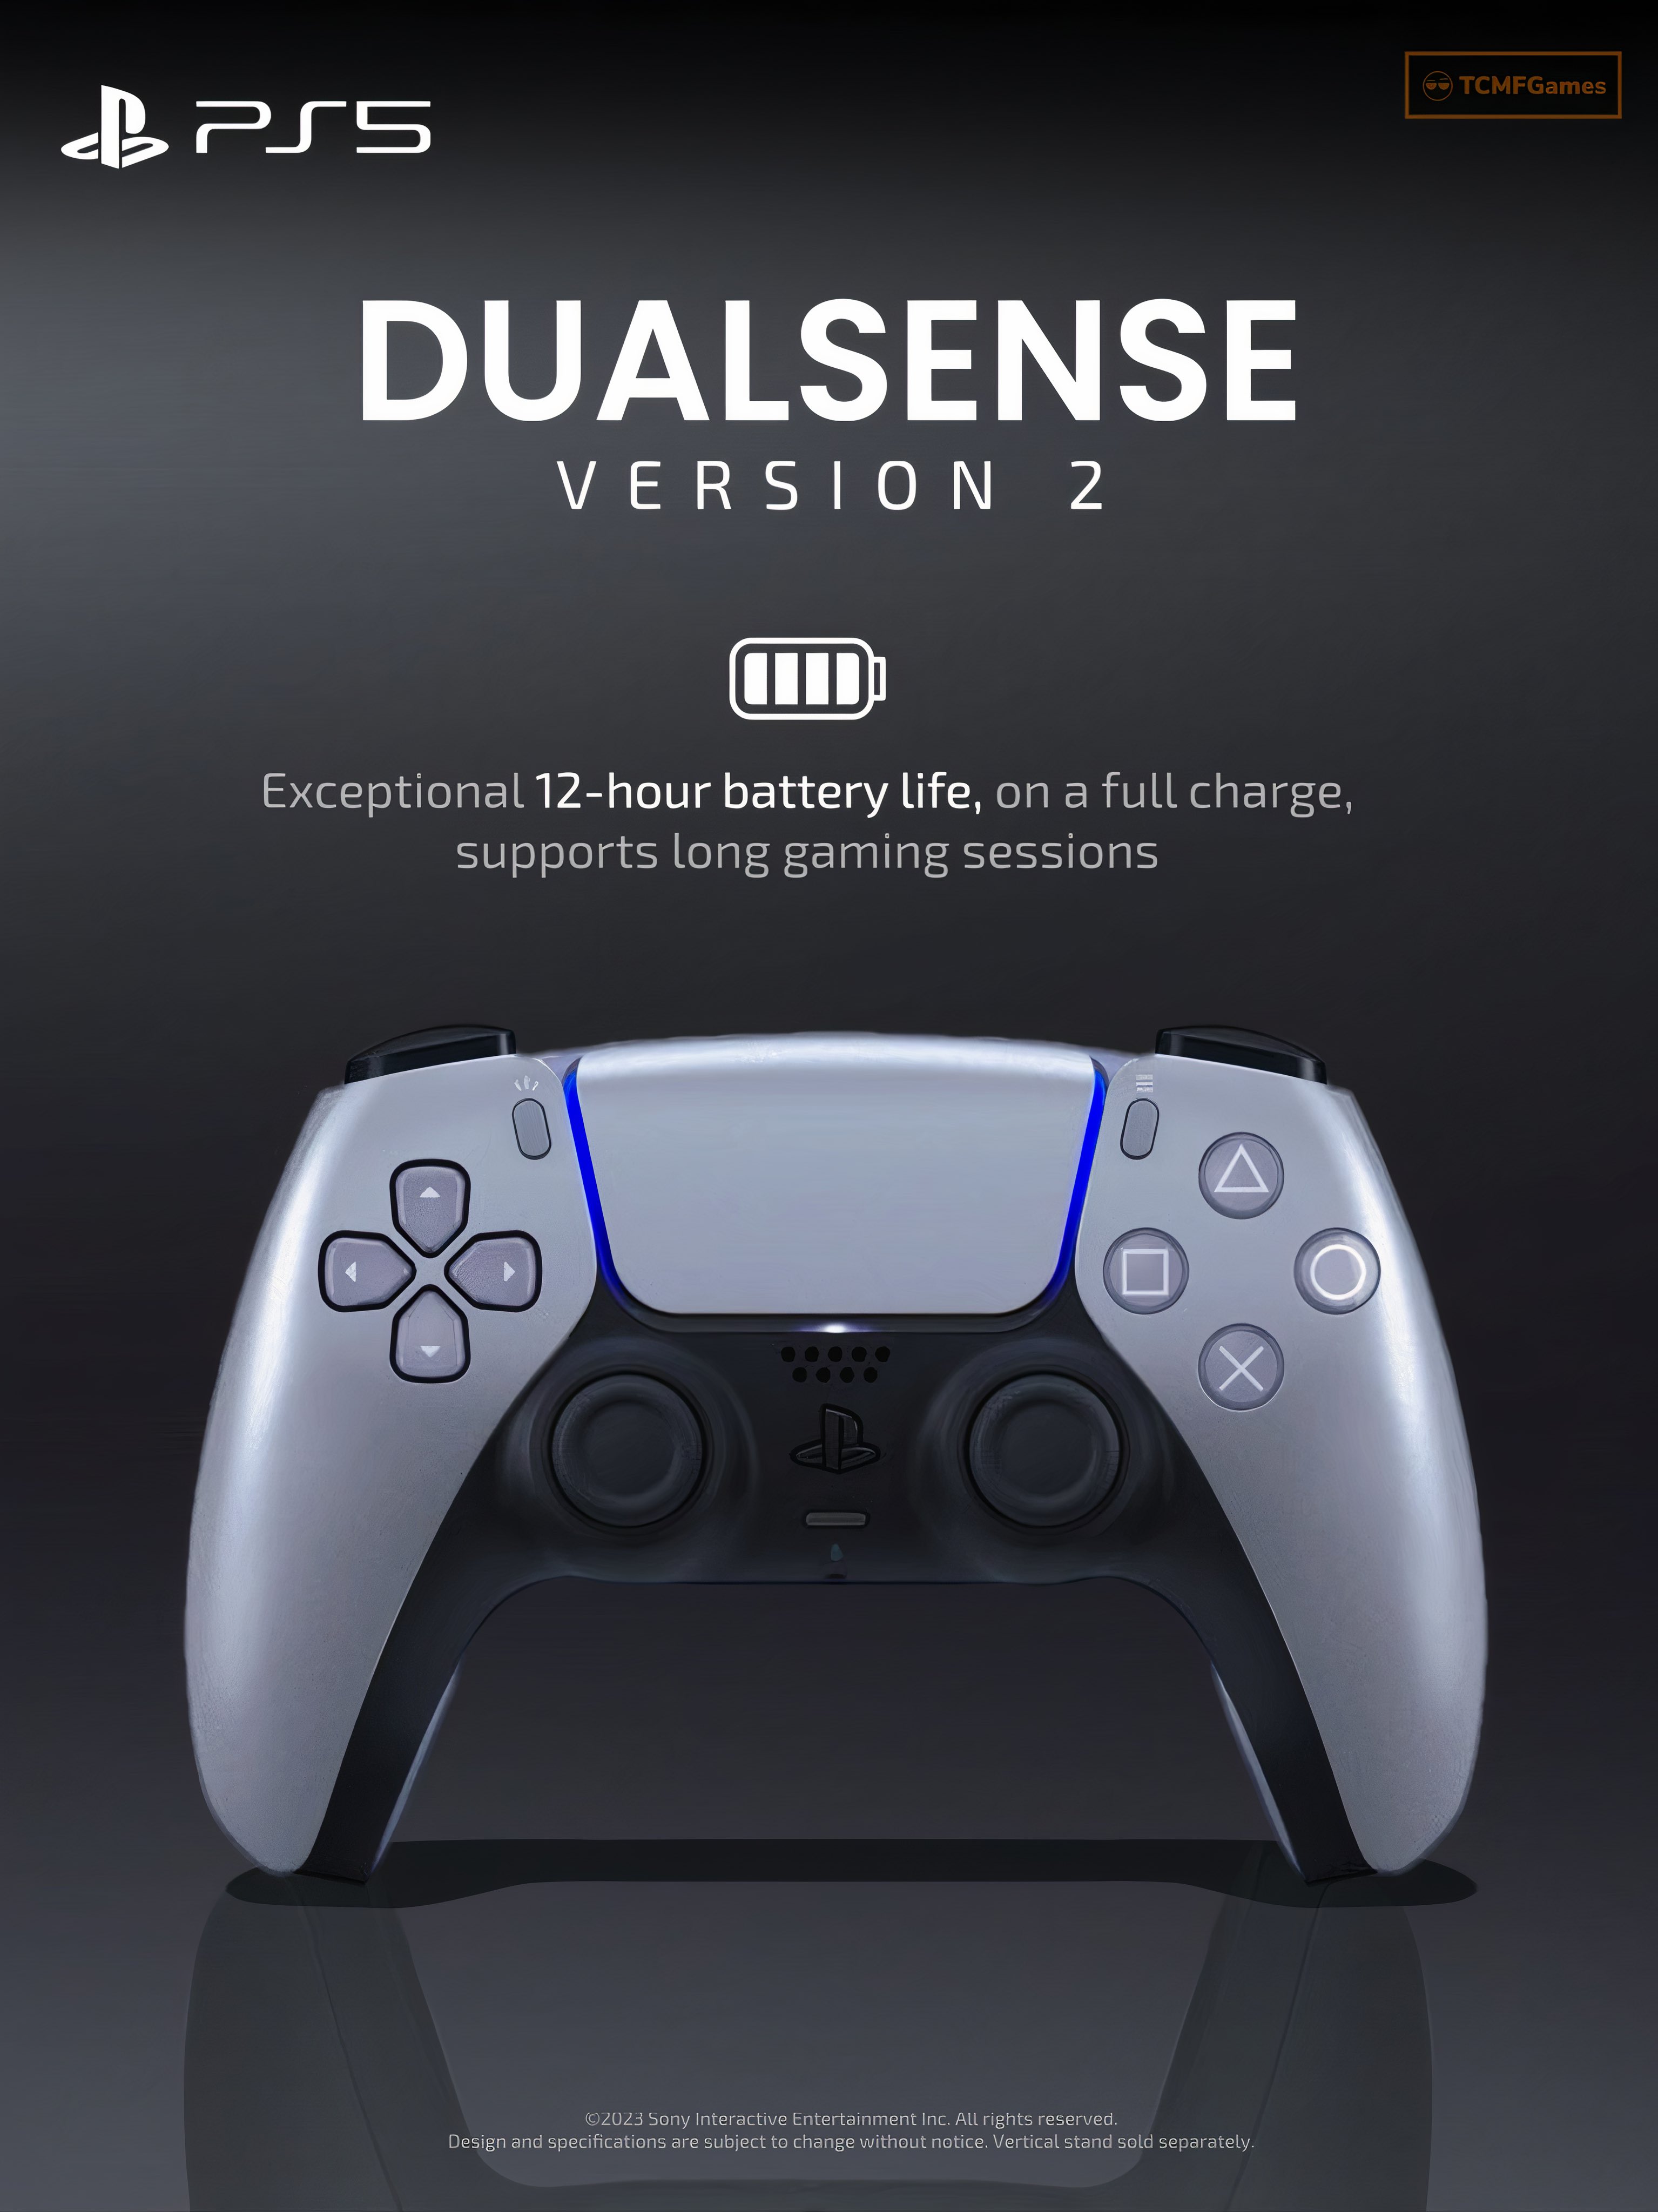 TCMFGames on X: NEW DUALSENSE VERSION 2 ( V2 ) 👀🔥 • This new version of  the Dualsense controller comes with an exceptional 12-hour battery life, on  a full charge, supports long